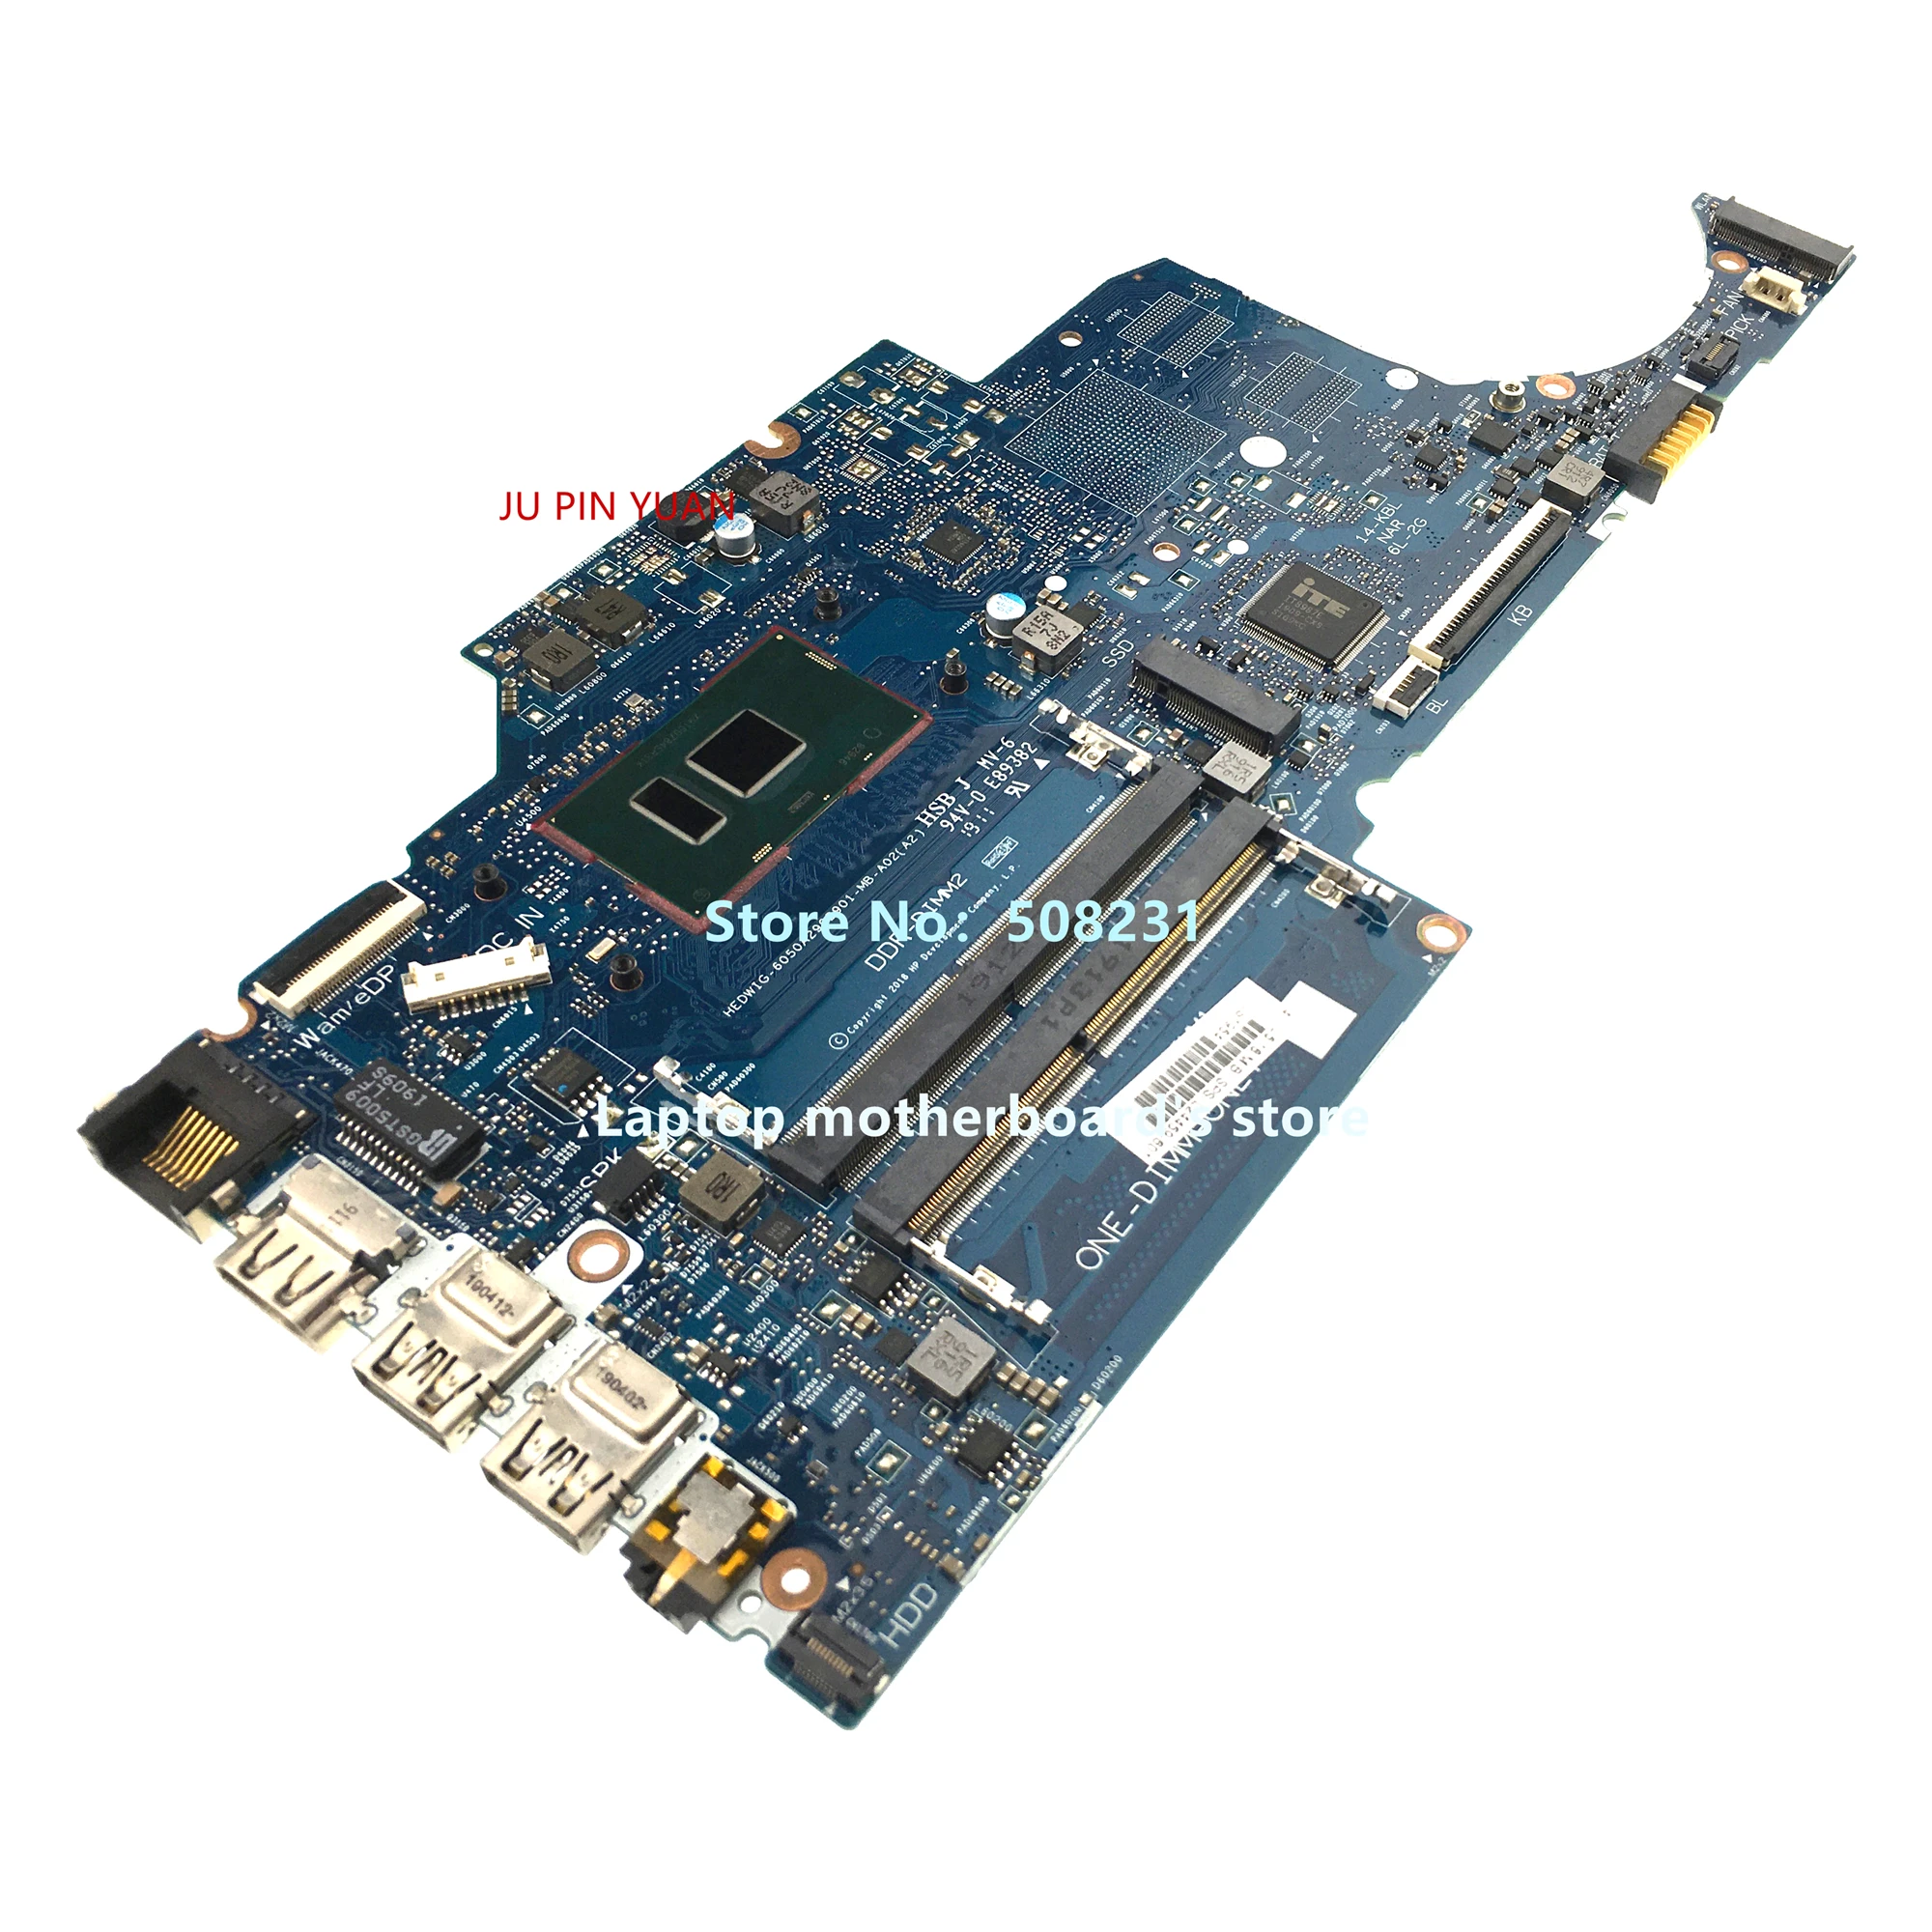 

For HP 14-DF 14-CF 14-CR 14S-CF 14S-CR Laptop Motherboard L24459-601 6050A2992901-MB-A02 CPU:SR3TK I3-7020U DDR4 100% Tested OK